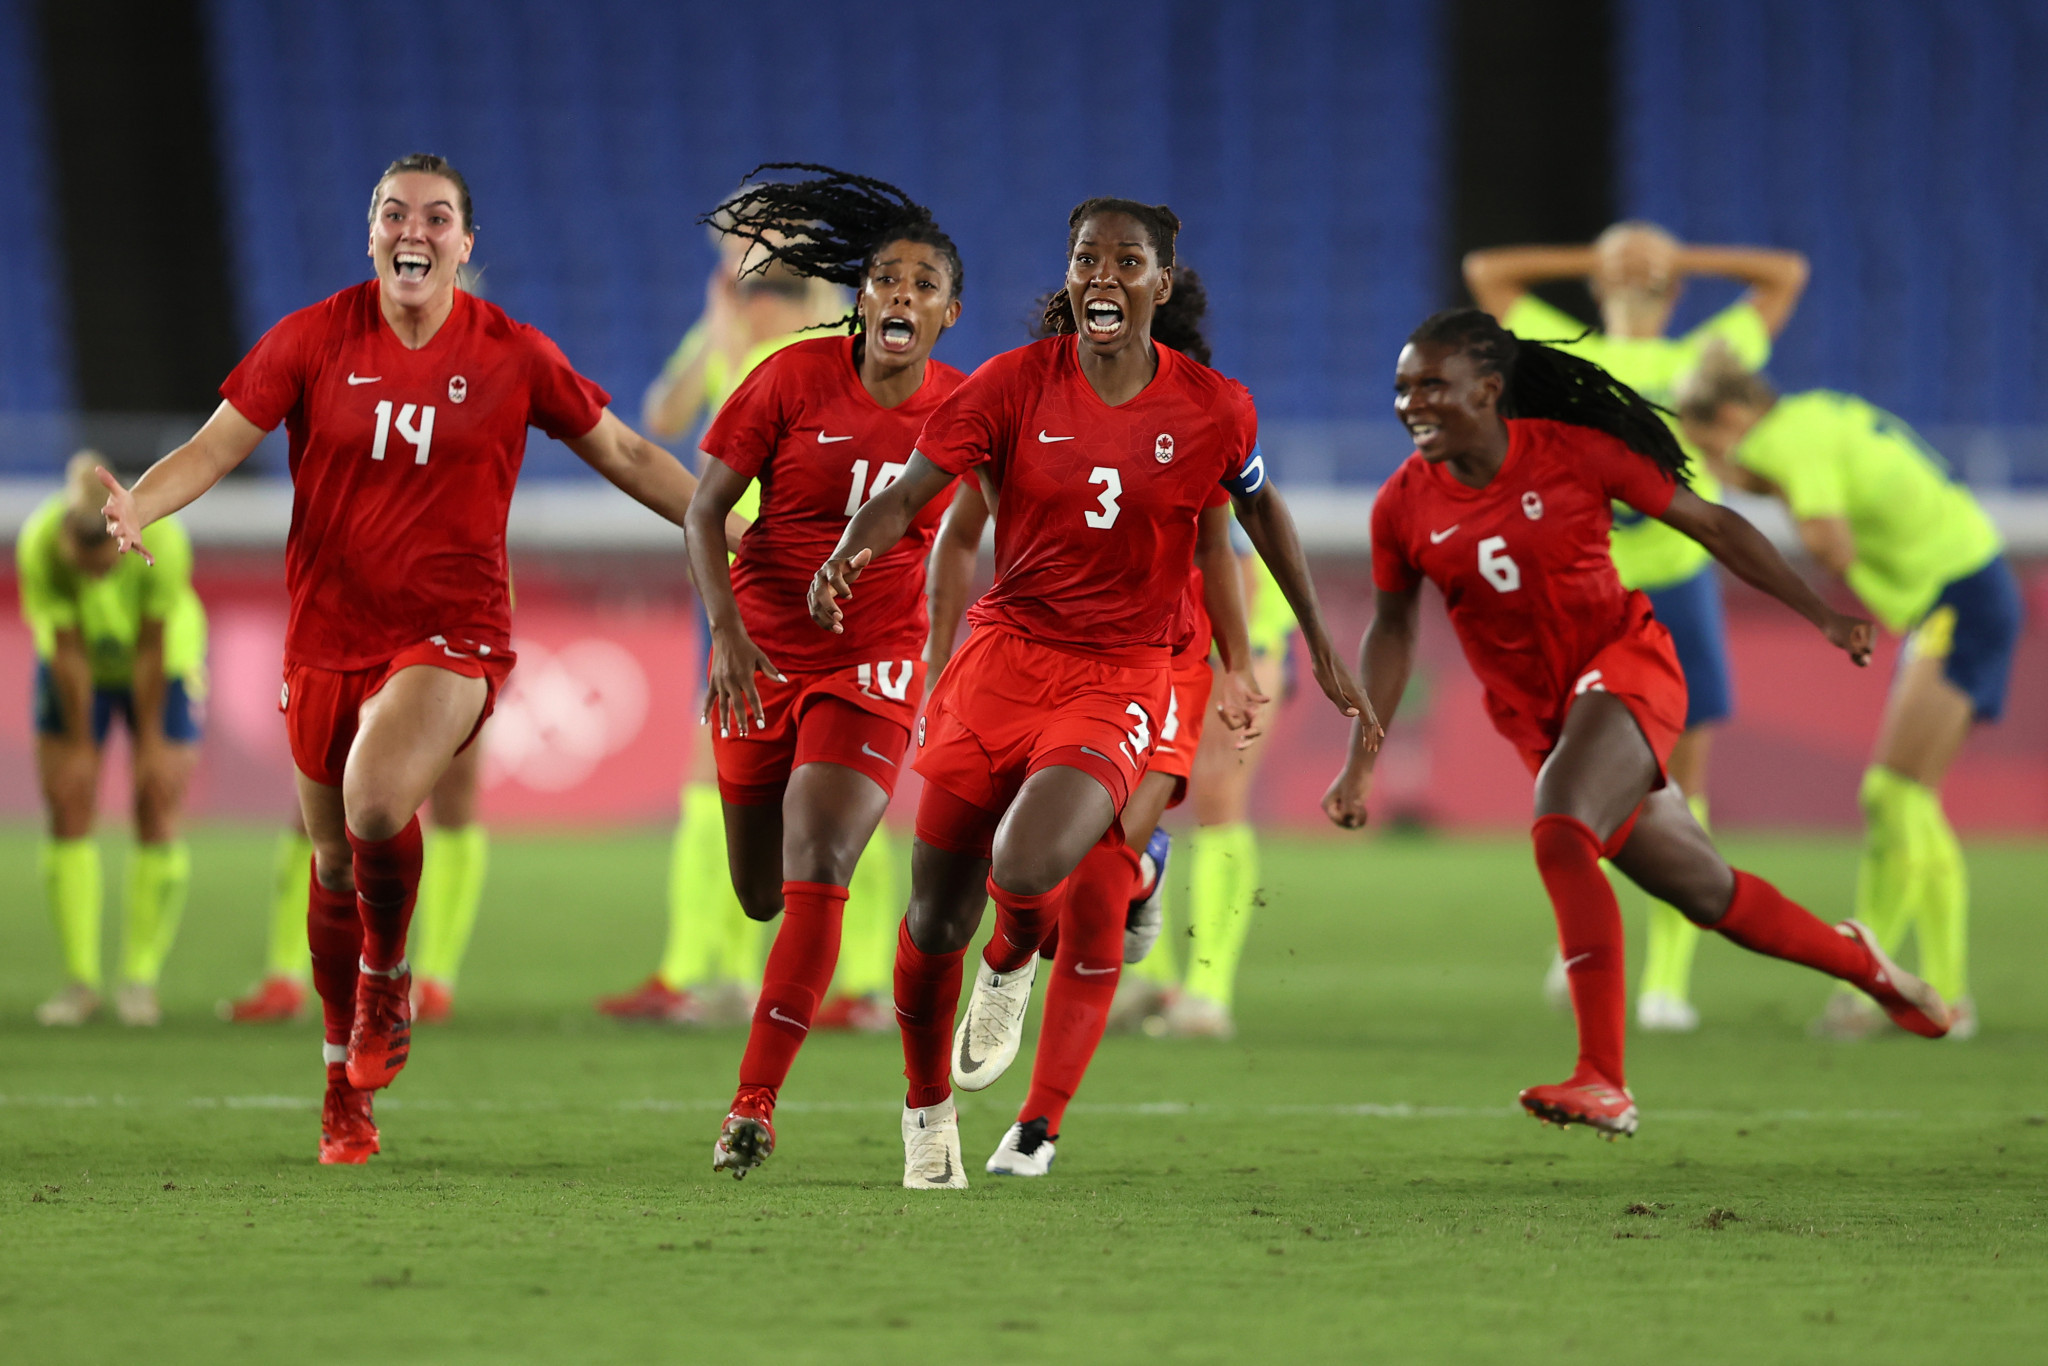 Canada, in red, defeated Sweden on penalties to win the women's football gold medal match ©Getty Images